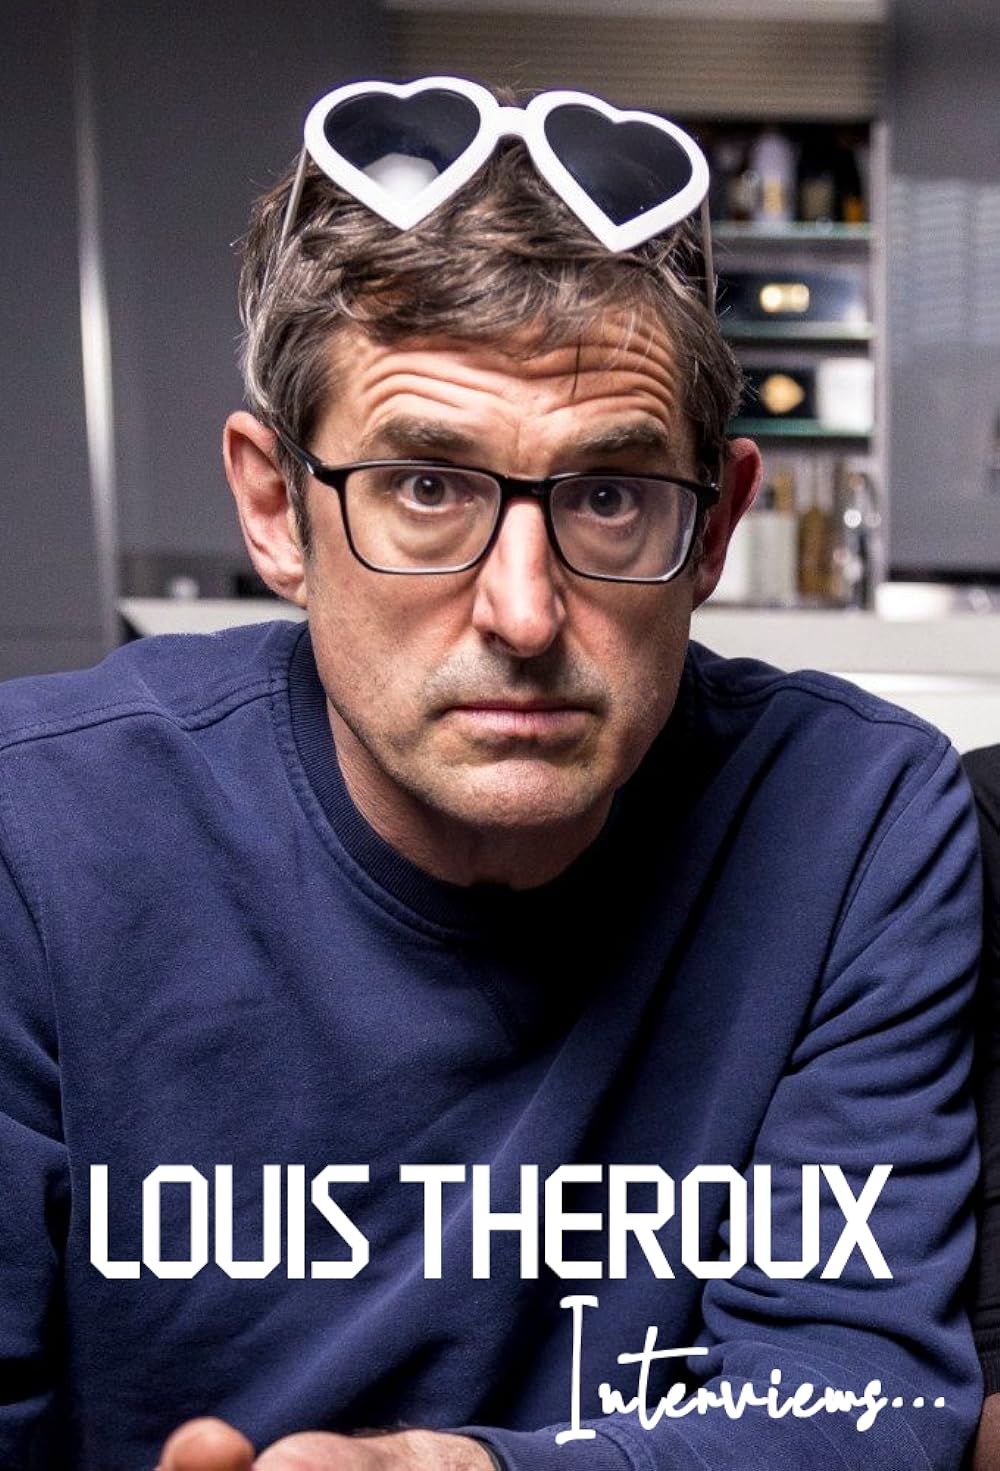 Louis Theroux Interviews